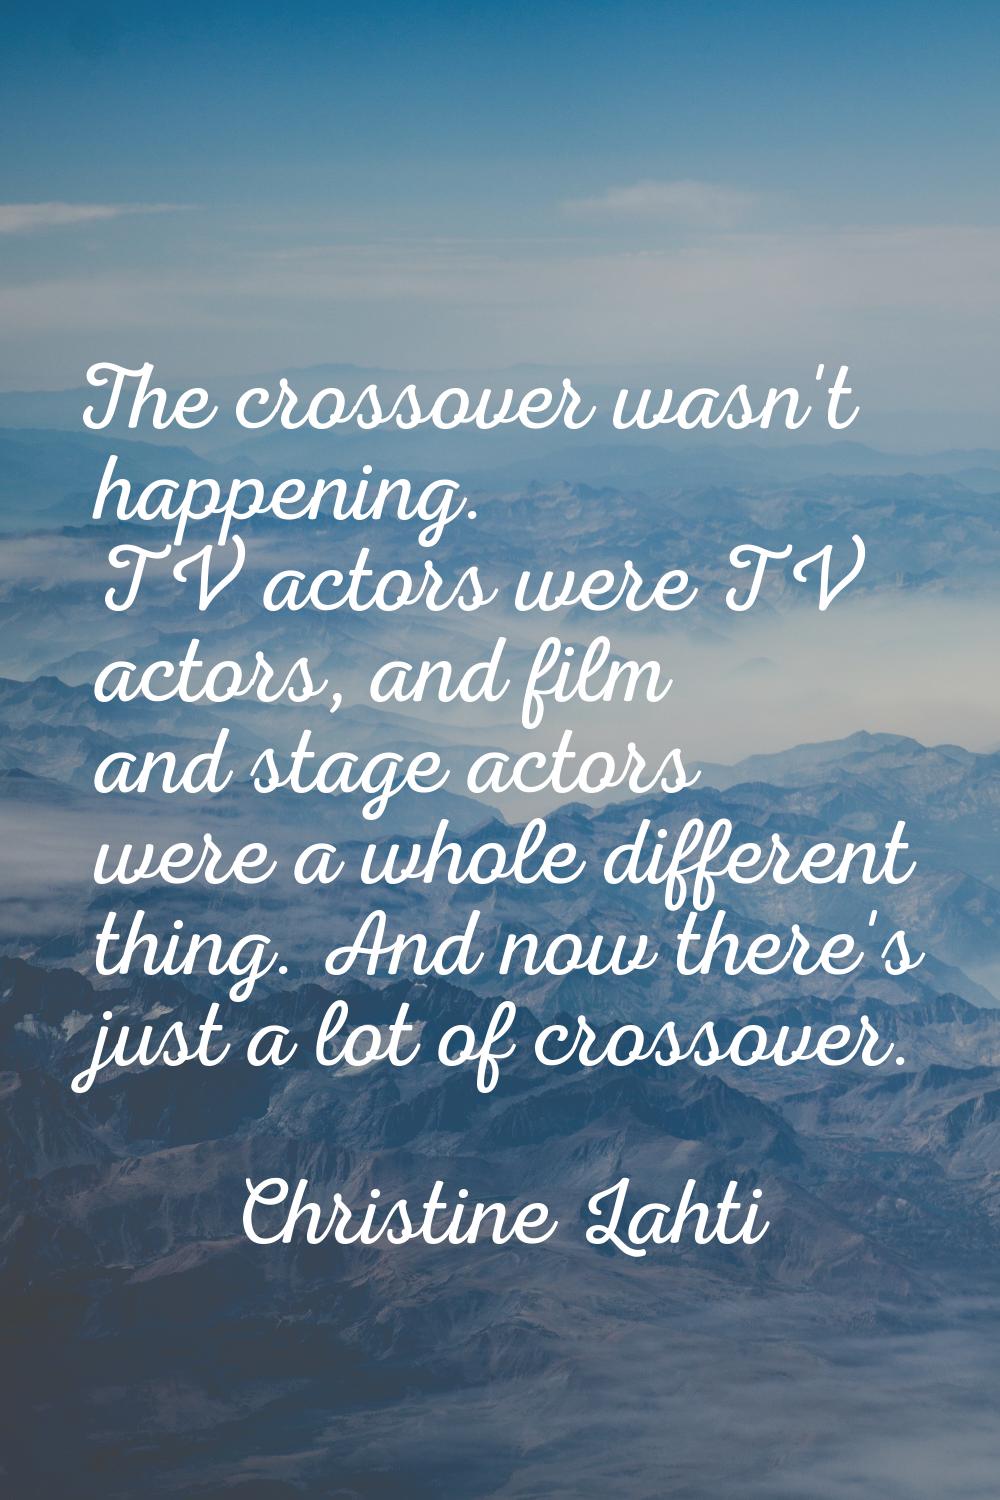 The crossover wasn't happening. TV actors were TV actors, and film and stage actors were a whole di